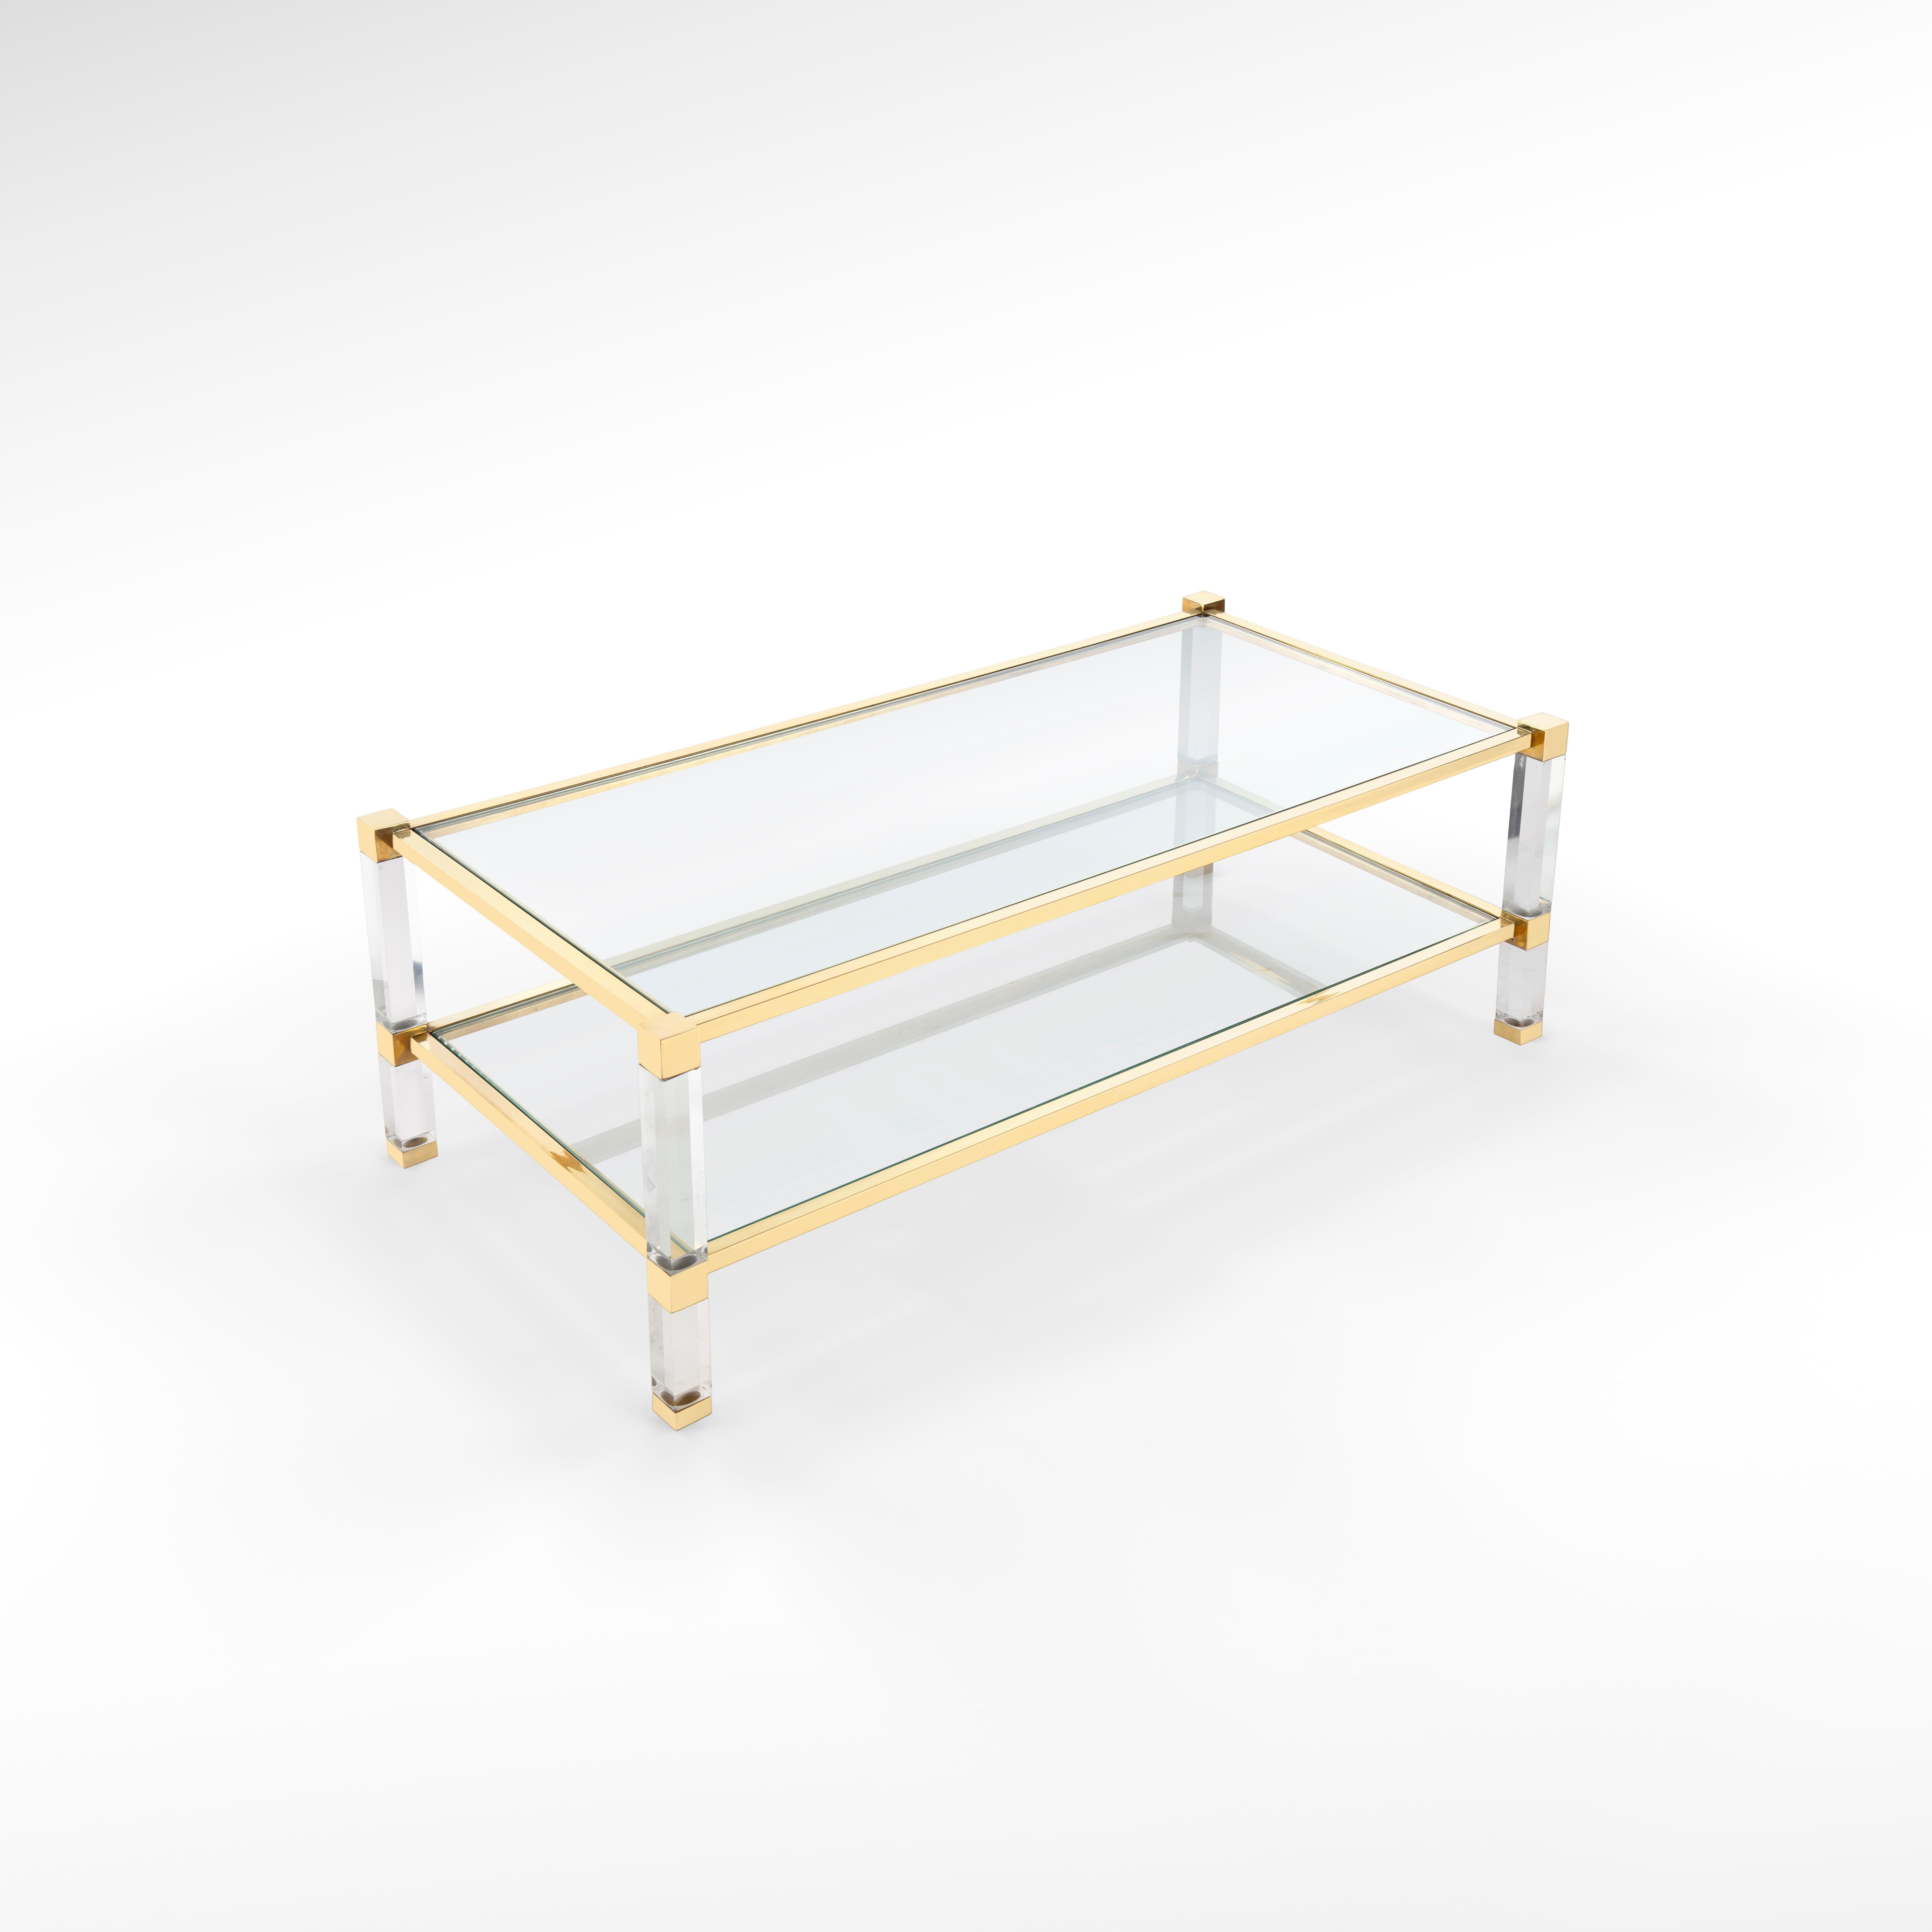 Timeless brass & plexiglass/ acrylic coffee table with glass top & shelf.
Translucent as Moonlight, this plexiglass and brass coffee table will make your space shimmer with elegance. It’s the perfect piece for your home to host guests with a touch